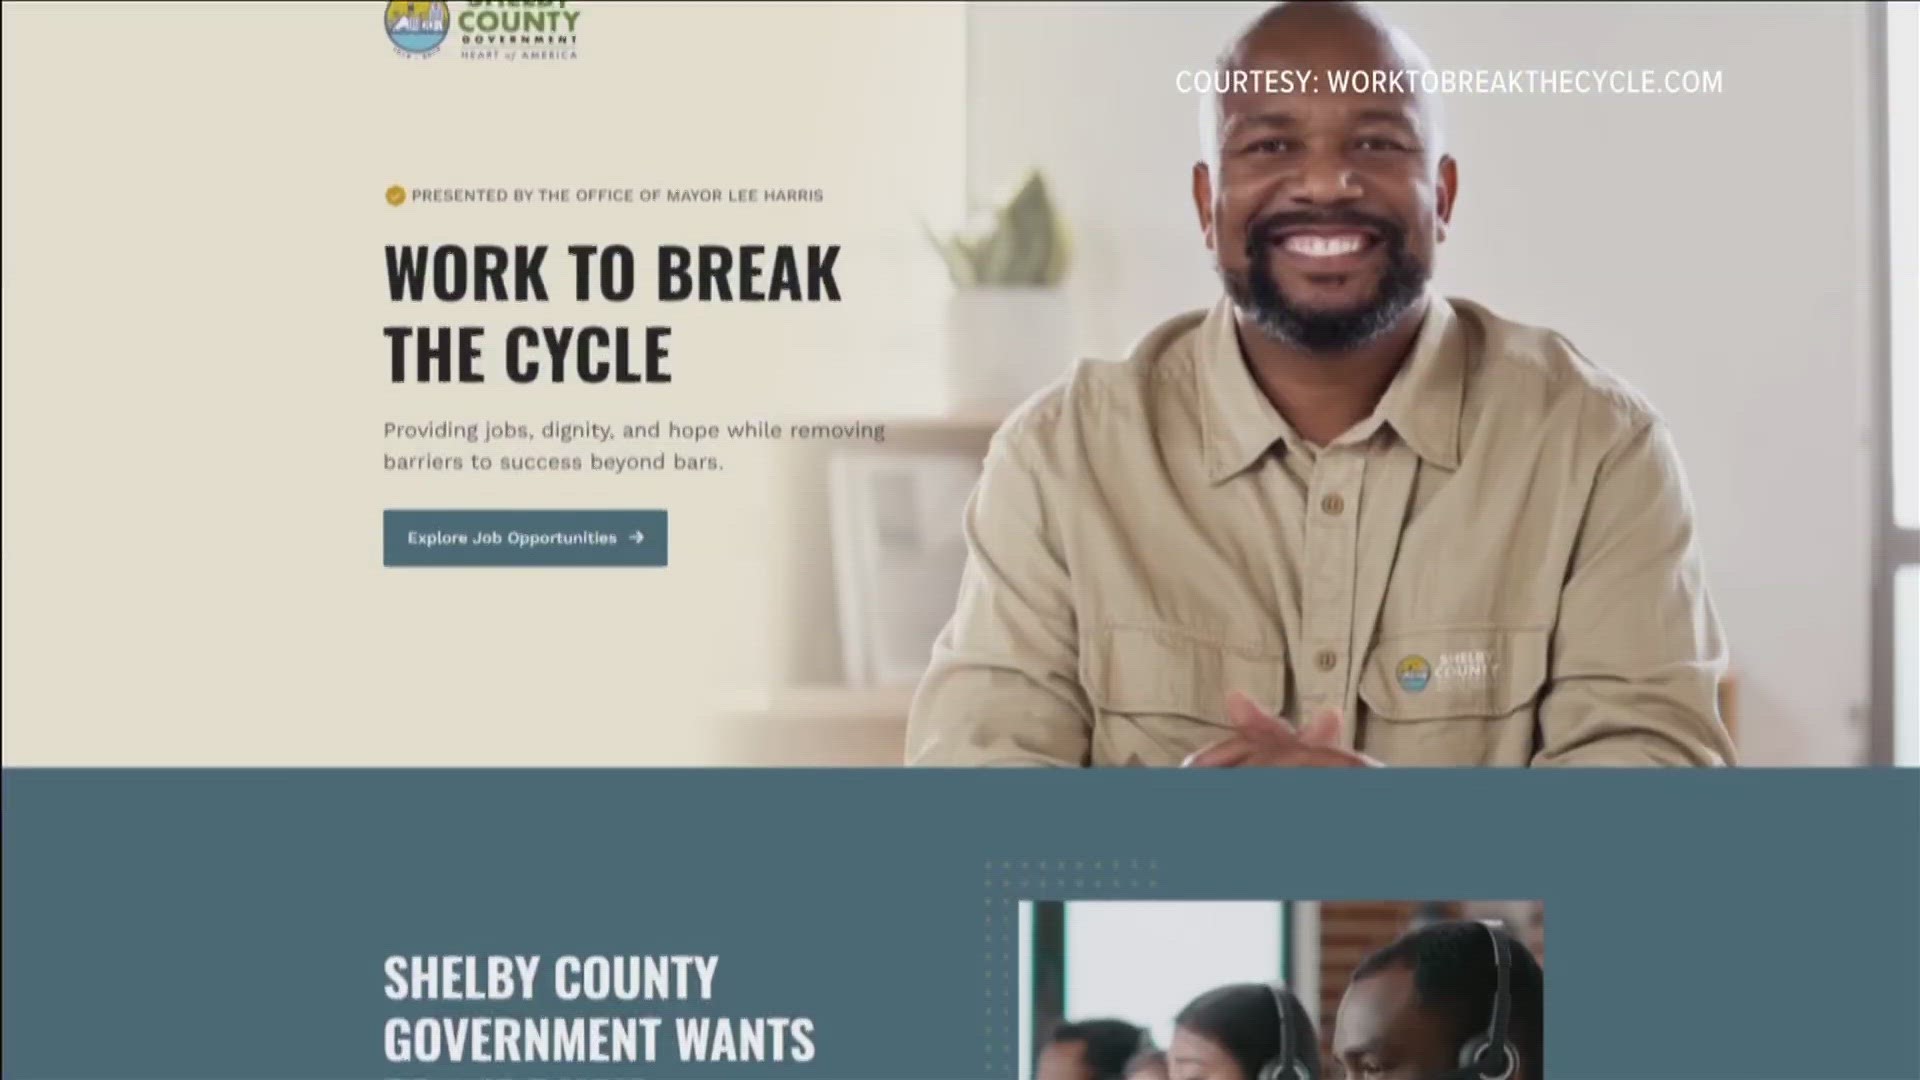 The ‘Work to Break the Cycle’ website is an online jobs site providing available Shelby County Government jobs for people who have had arrests or convictions.